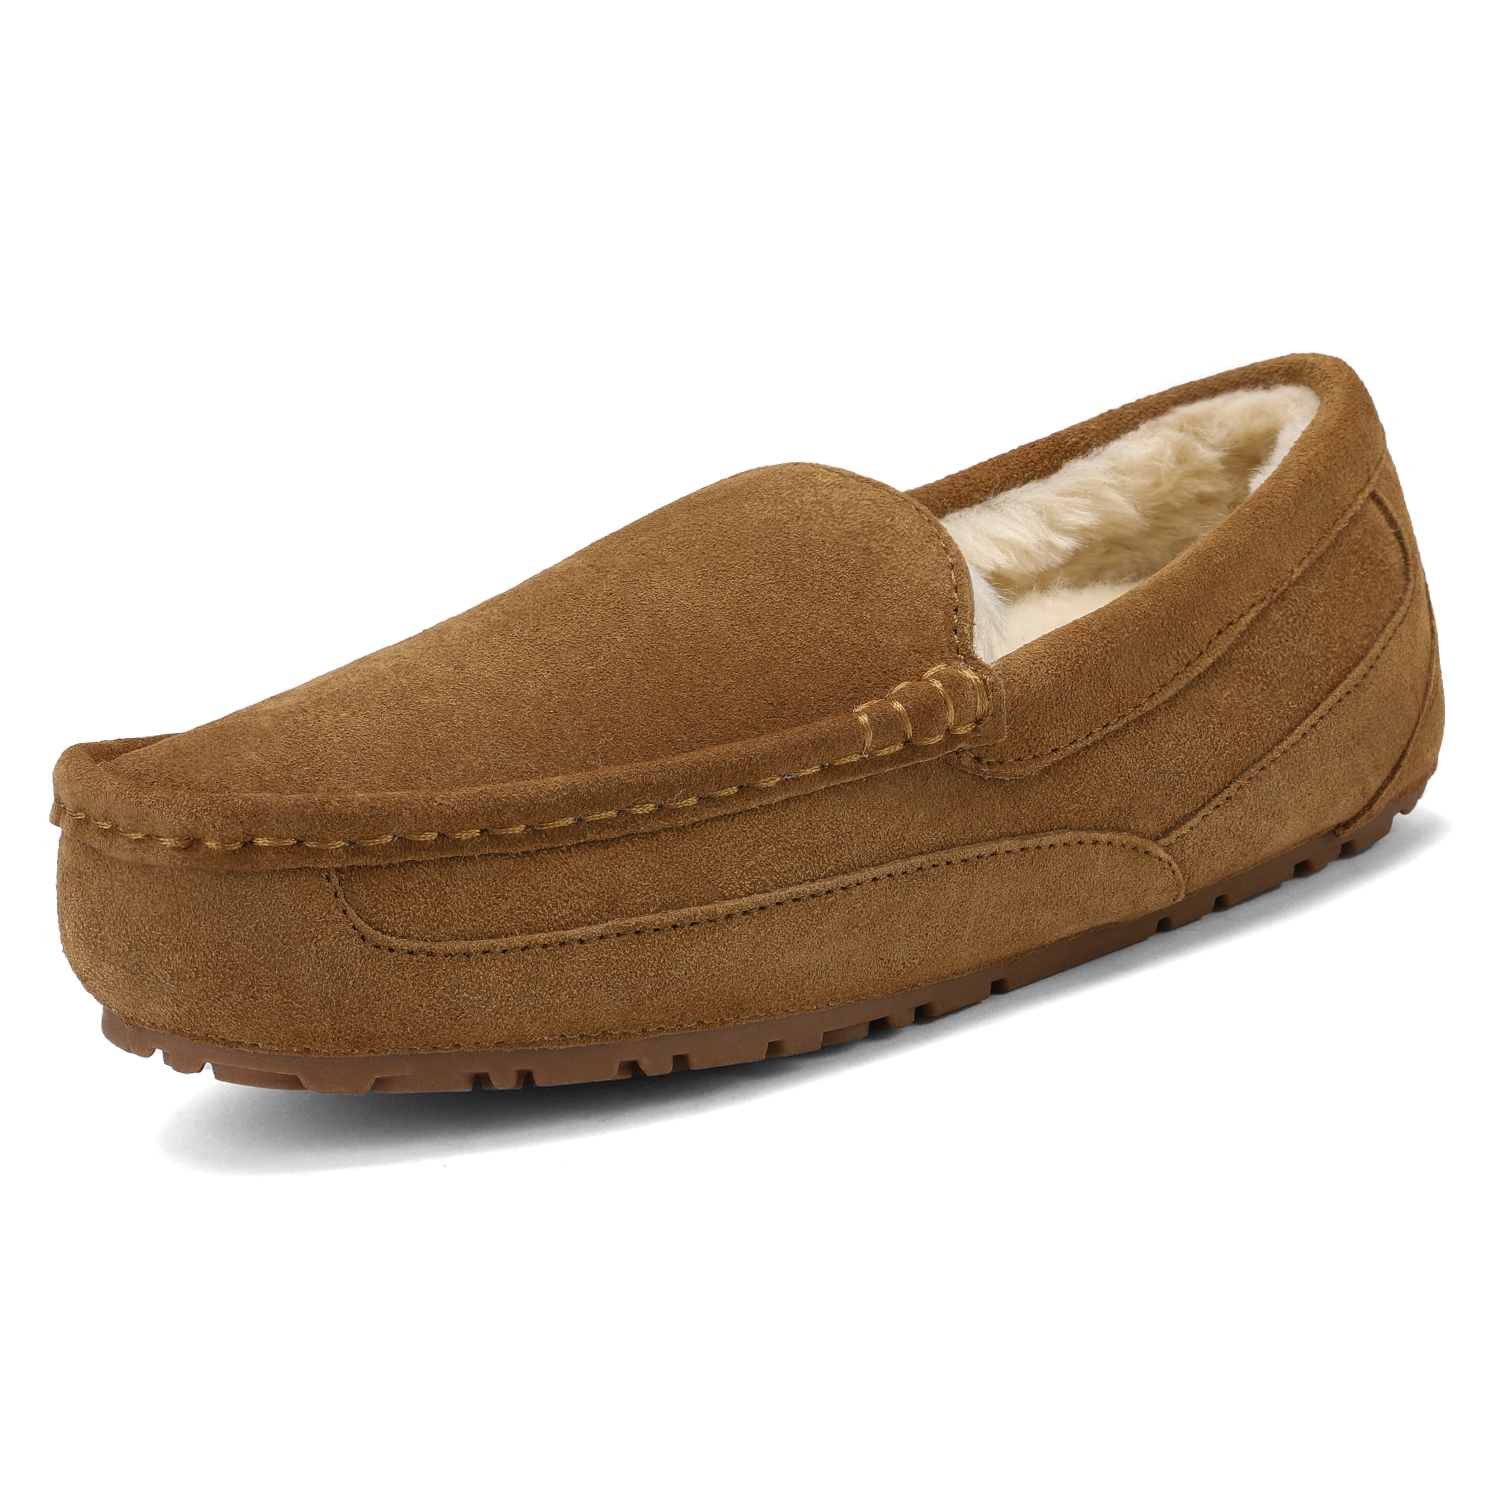 DREAM PAIRS Men's Suede Faux Fur Lined Moccasin Slippers 